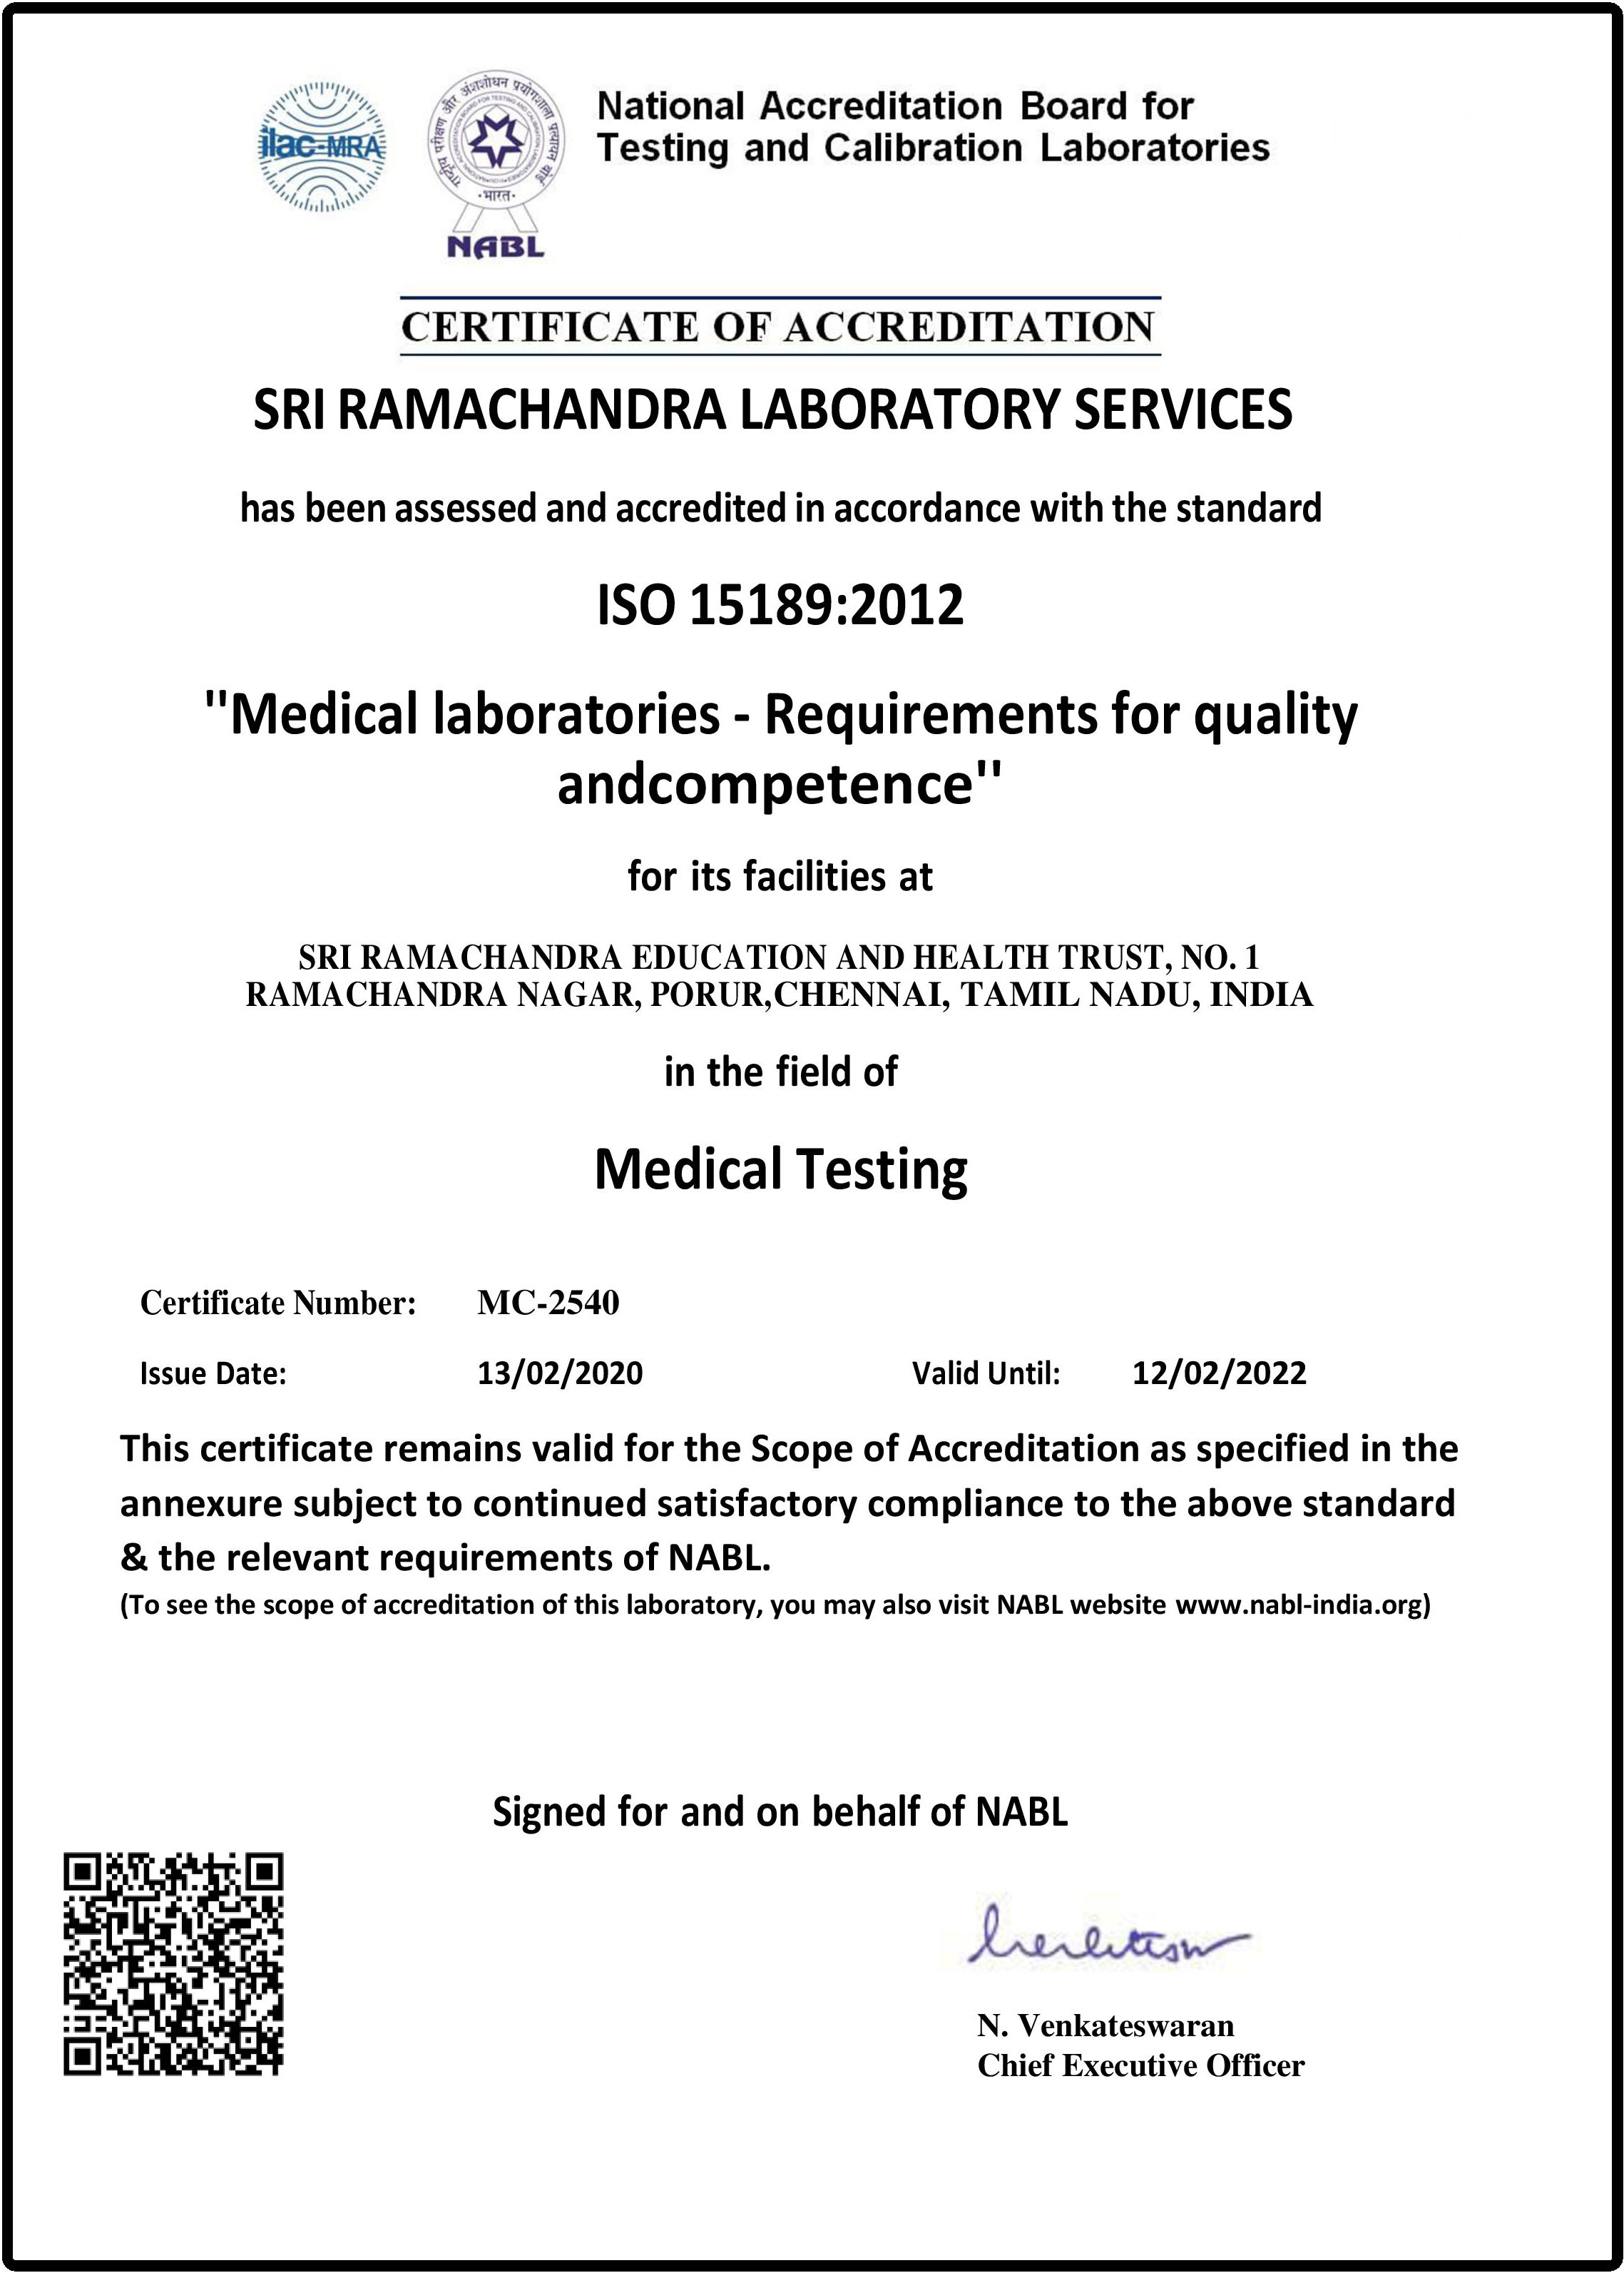 Directory of Laboratory Services